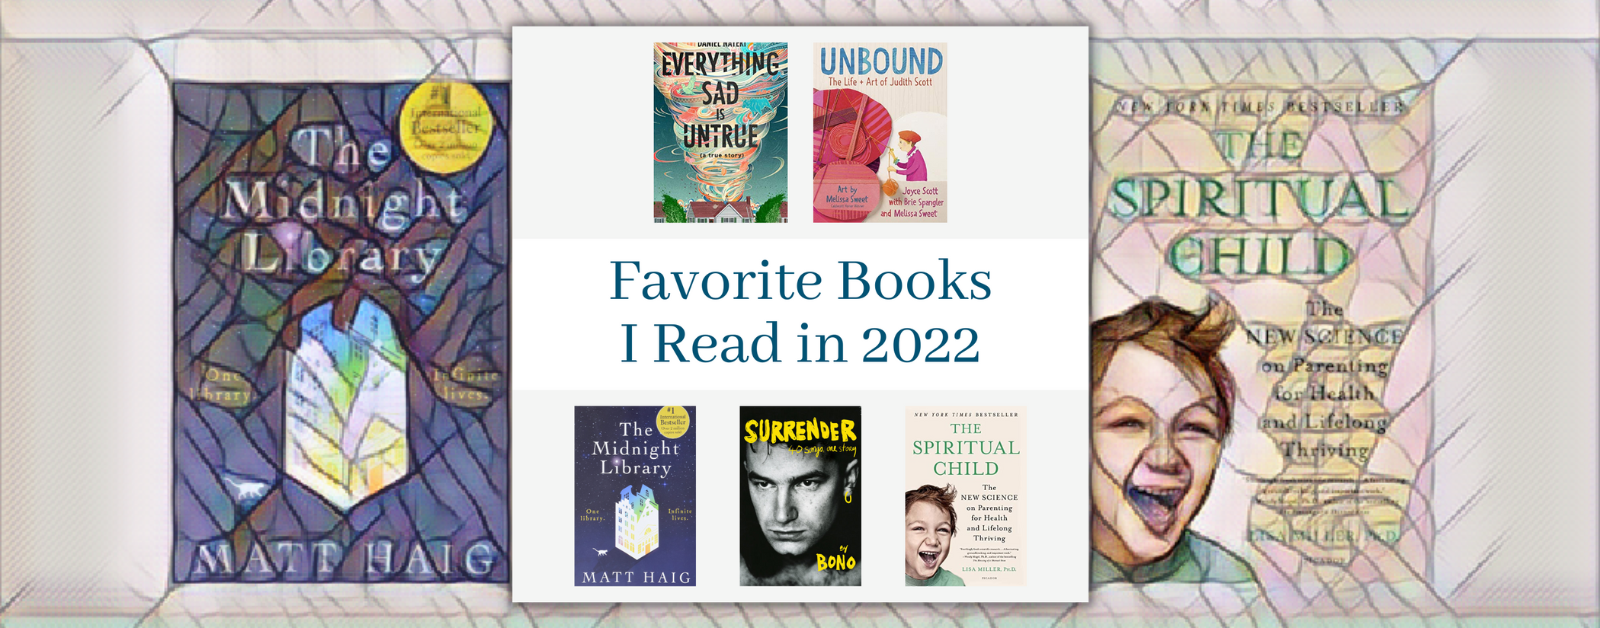 mosaic background with gray graphic with blue text that says Favorite Books I Read in 2022 and book covers of: Everything Sad Is Untrue, Unbound, The Midnight Library, Surrender, The Spiritual Child